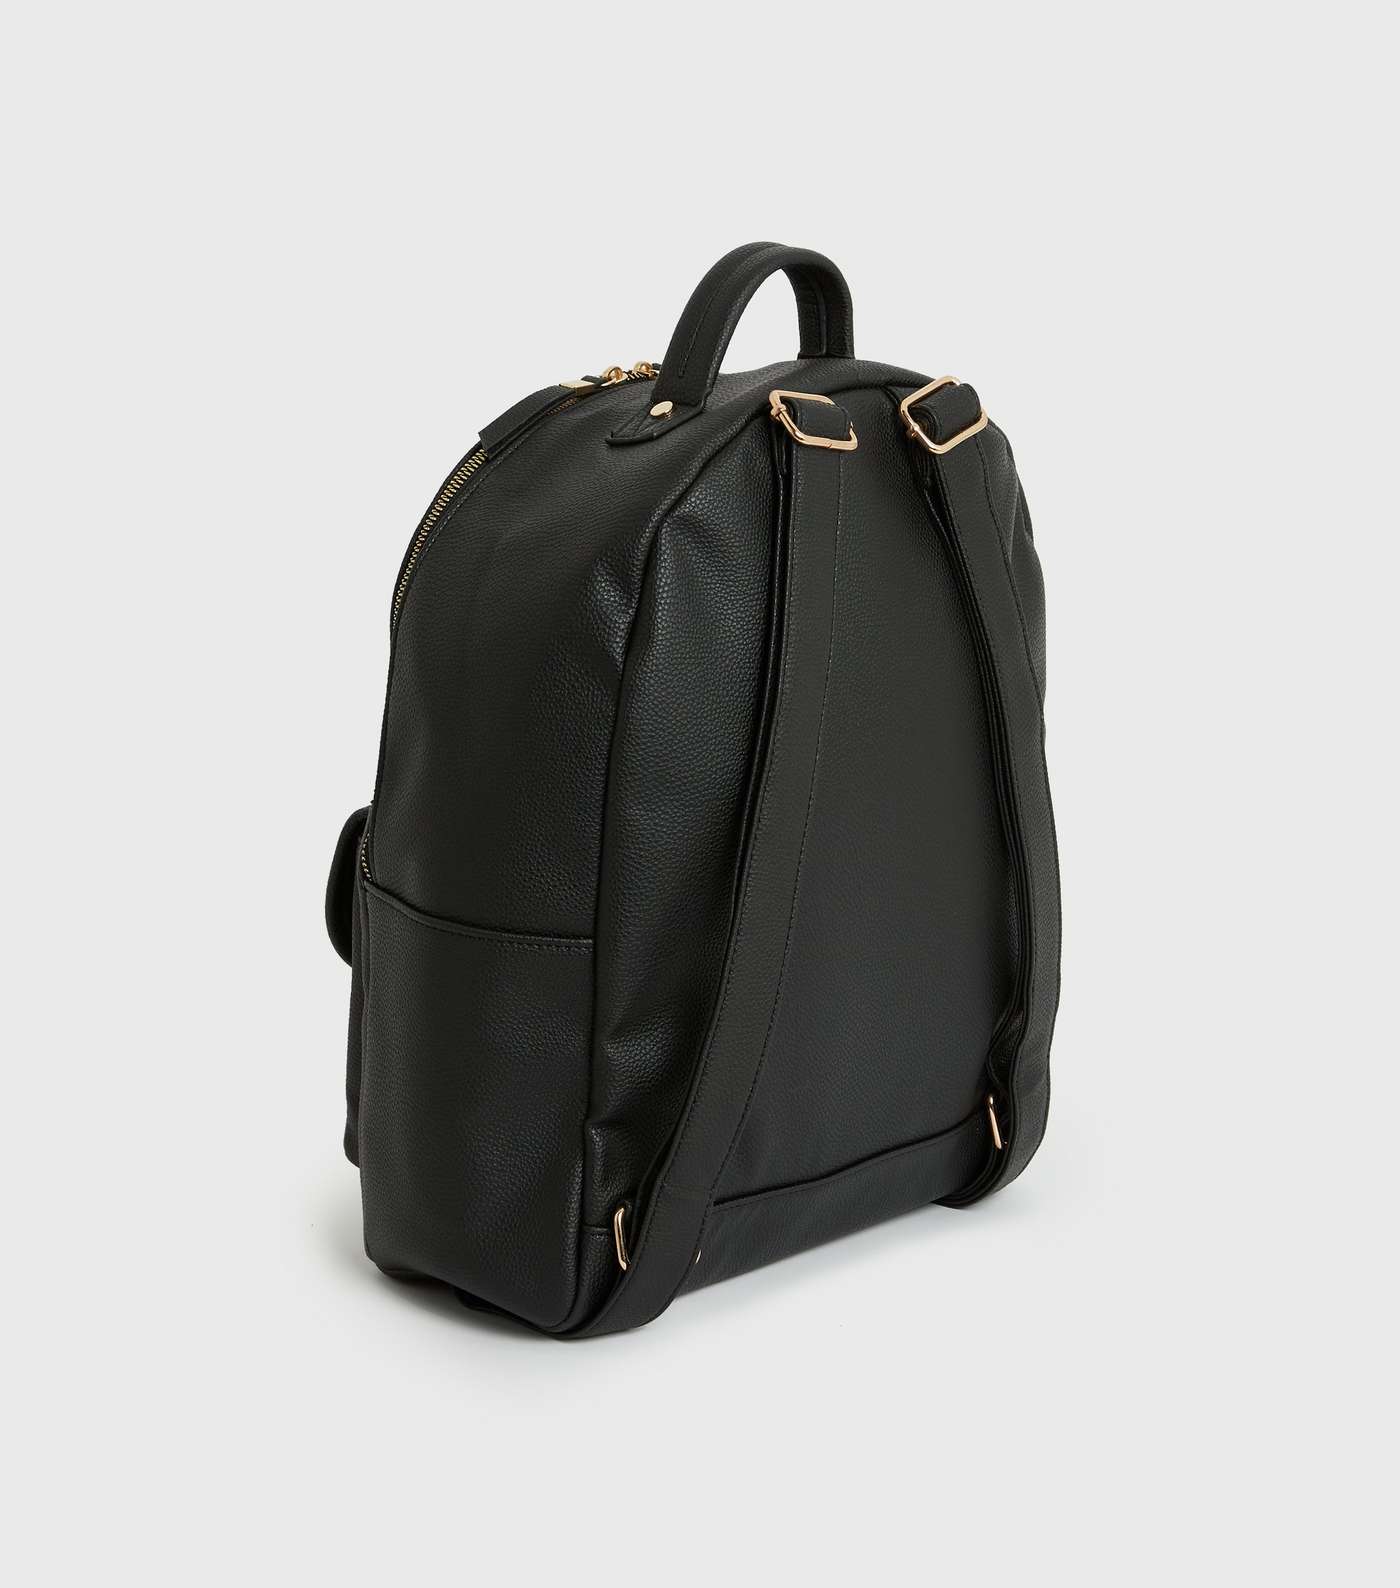 Black Leather-Look Ring Front Backpack Image 3